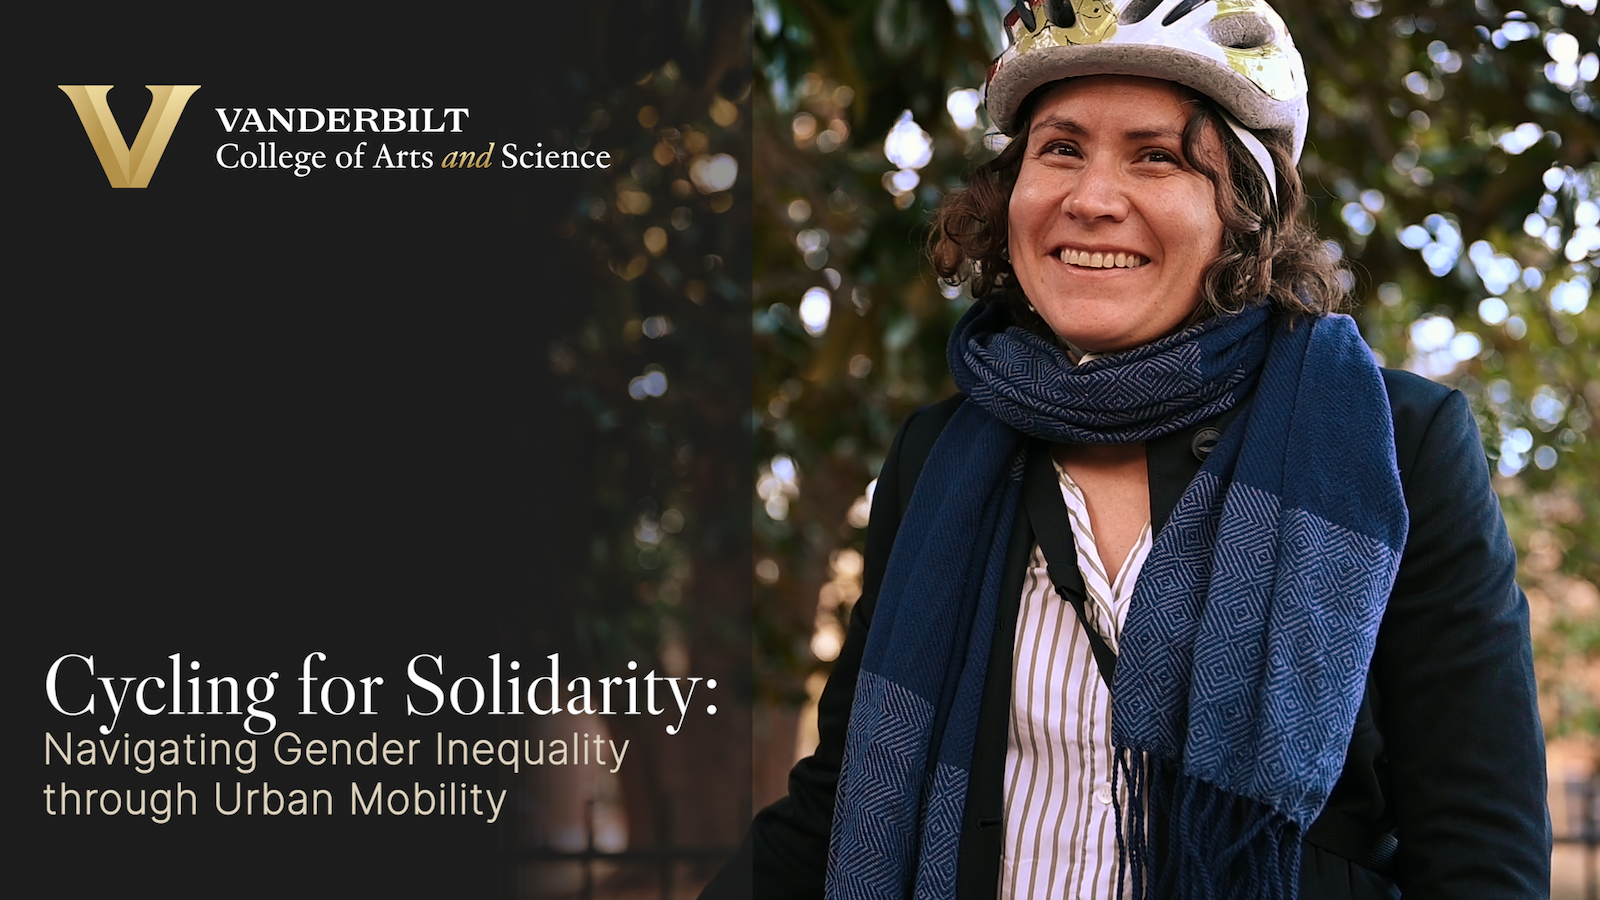 Cycling for Solidarity: Navigating Gender Inequality through Urban Mobility